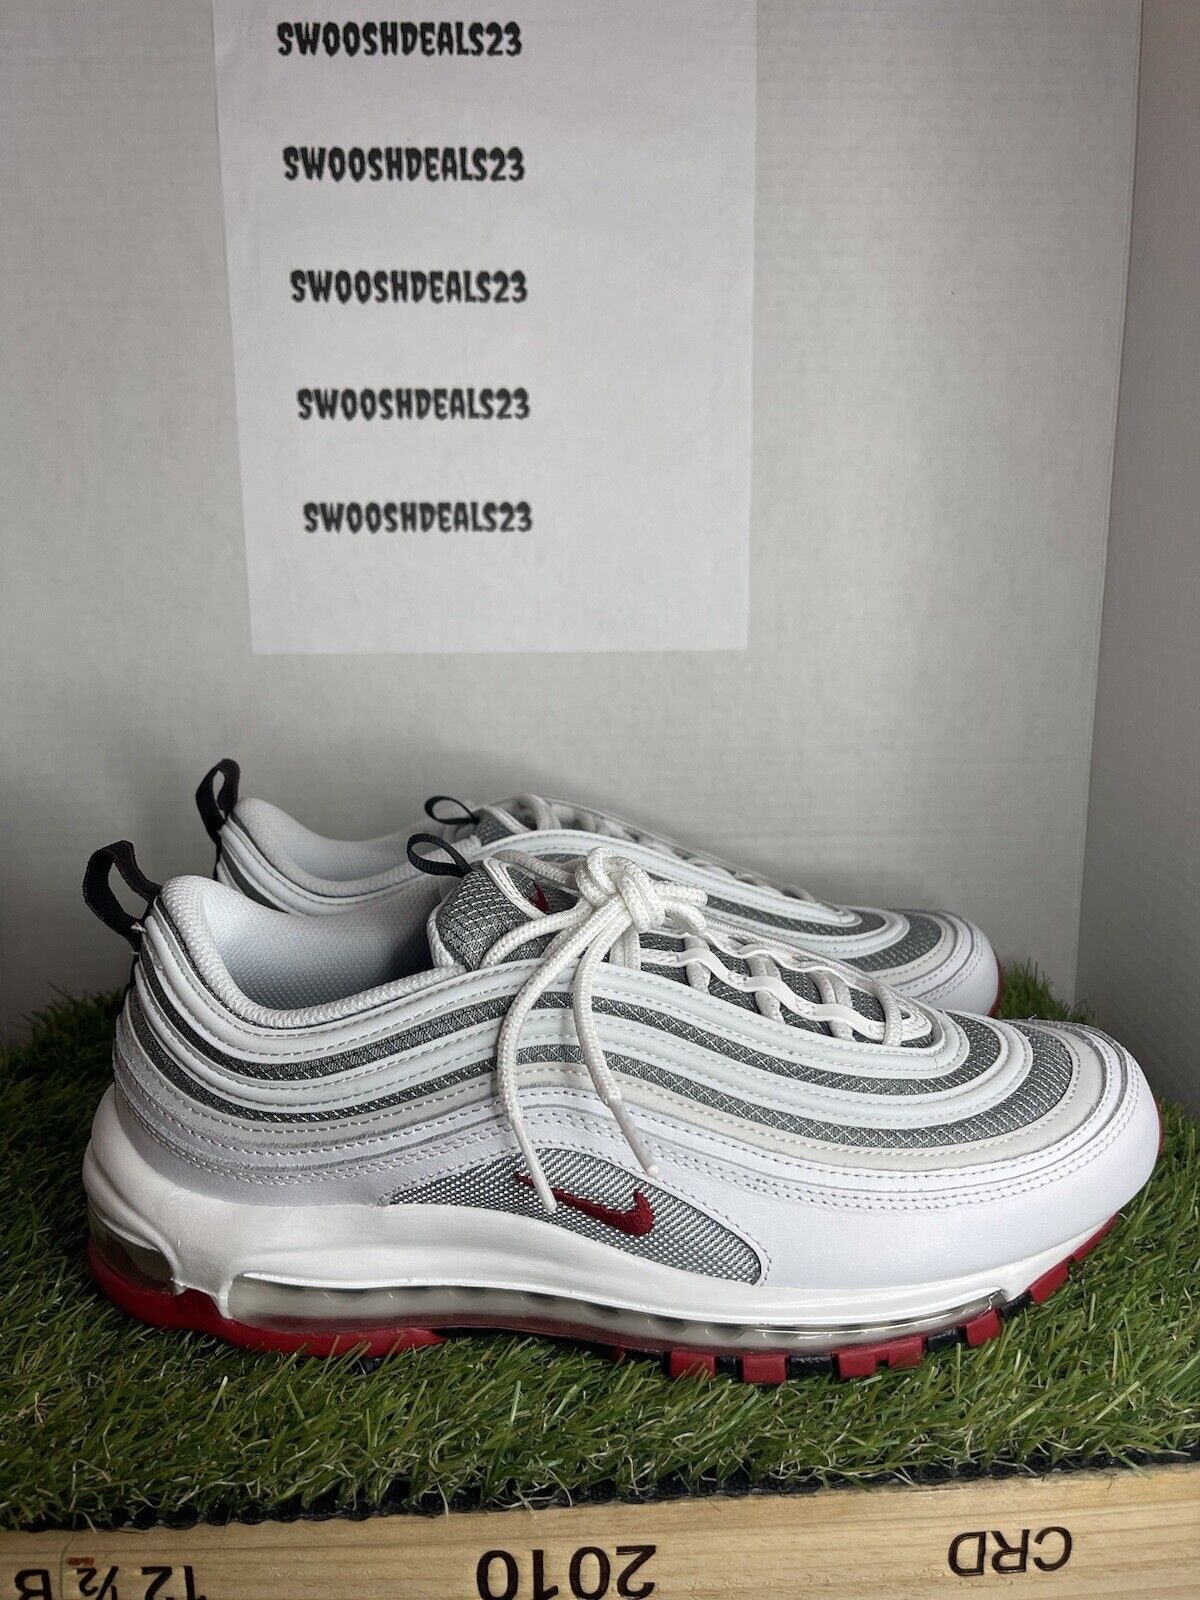 Nike Air Max 97 'White Bullet' Silver Red Shoes Men's Size 9.5 DM0027 100